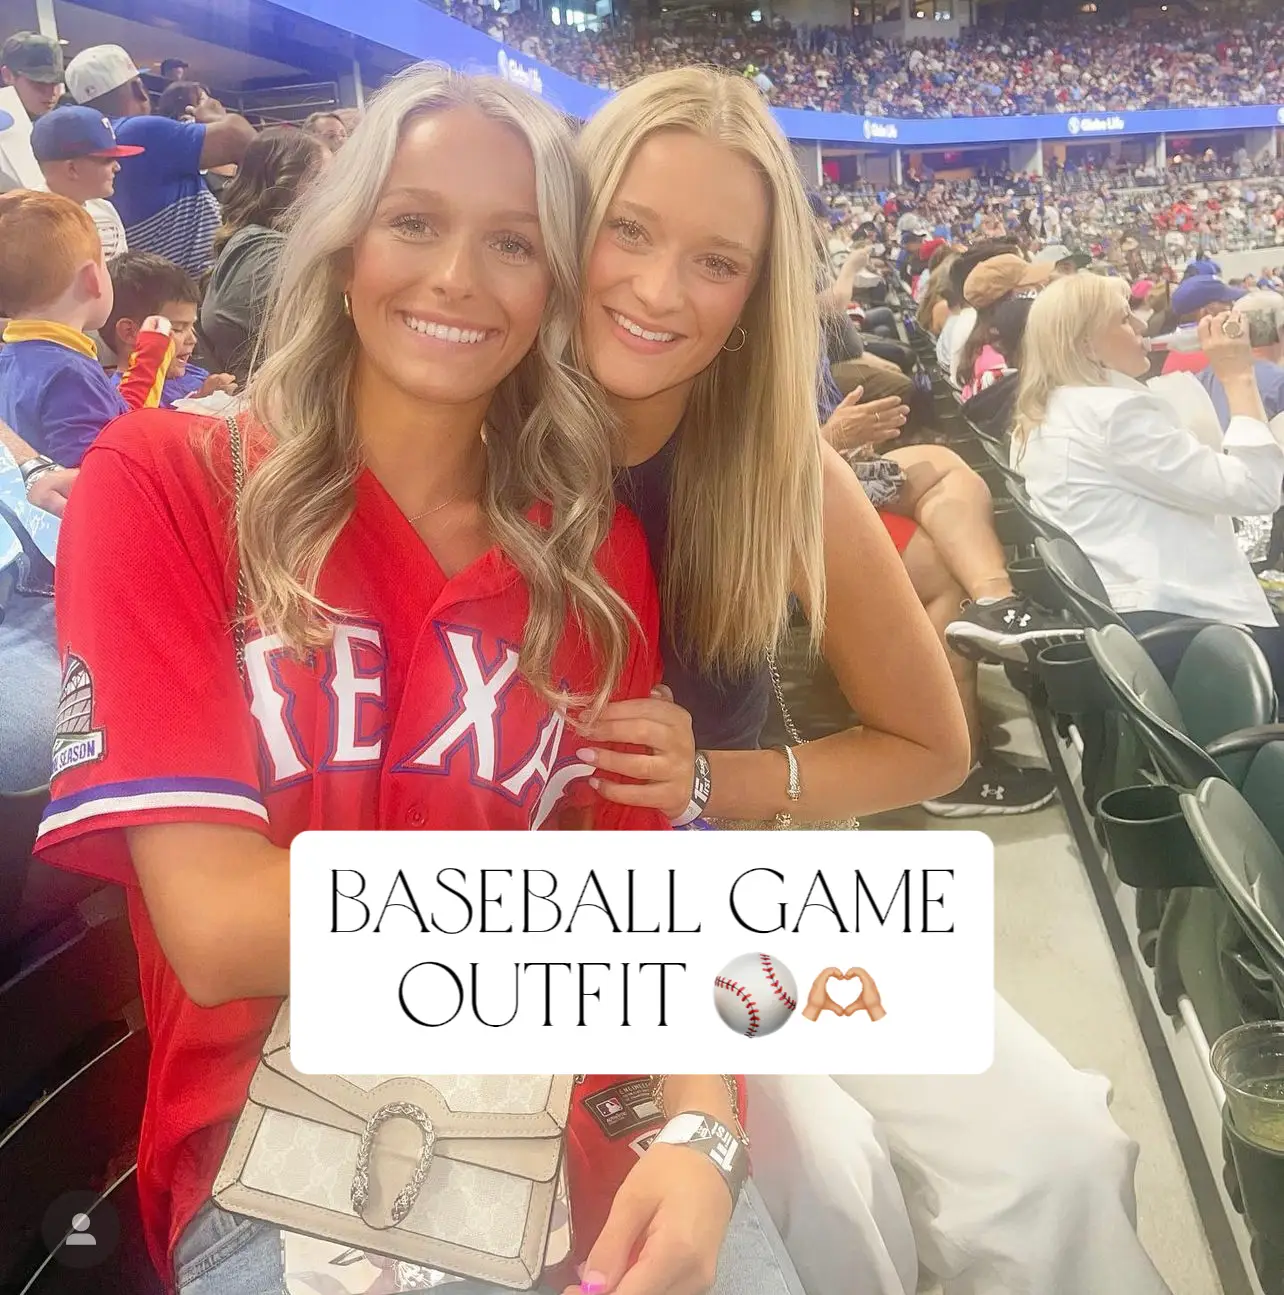 Baseball Game Outfit  Baseball outfit, Baseball game outfits